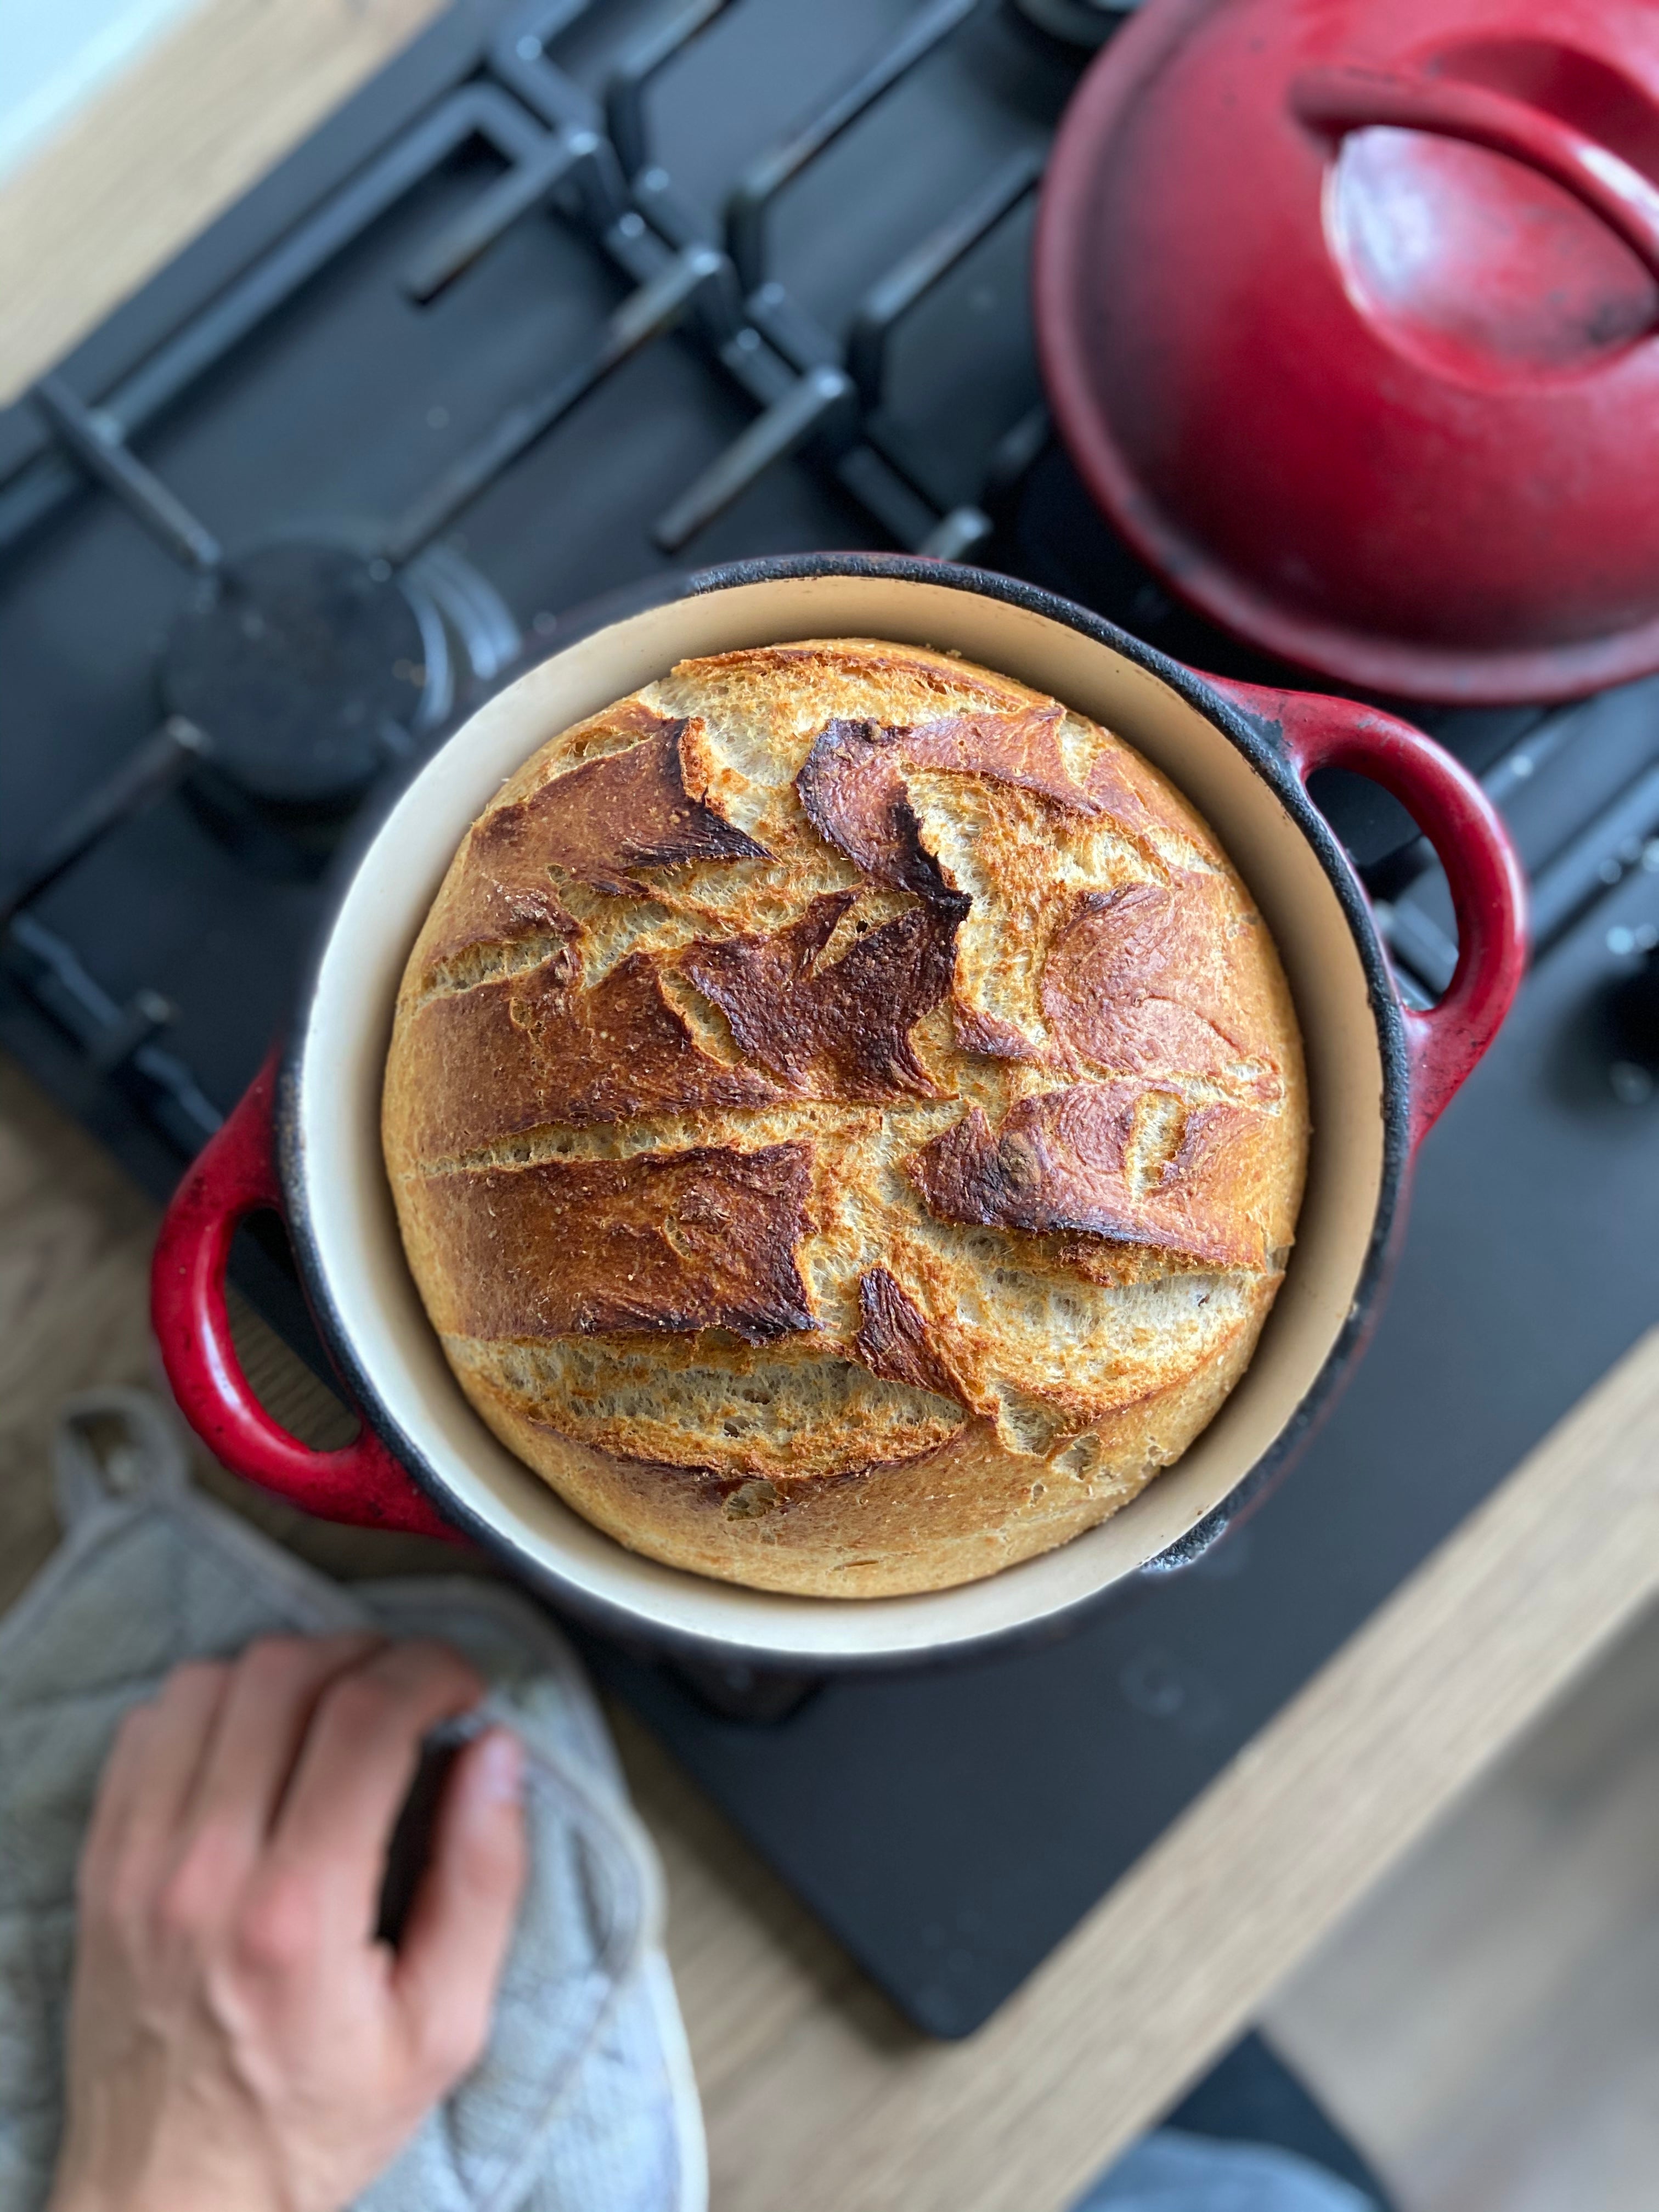 Le Creuset on X: Get creative with our newest Bread Oven recipes